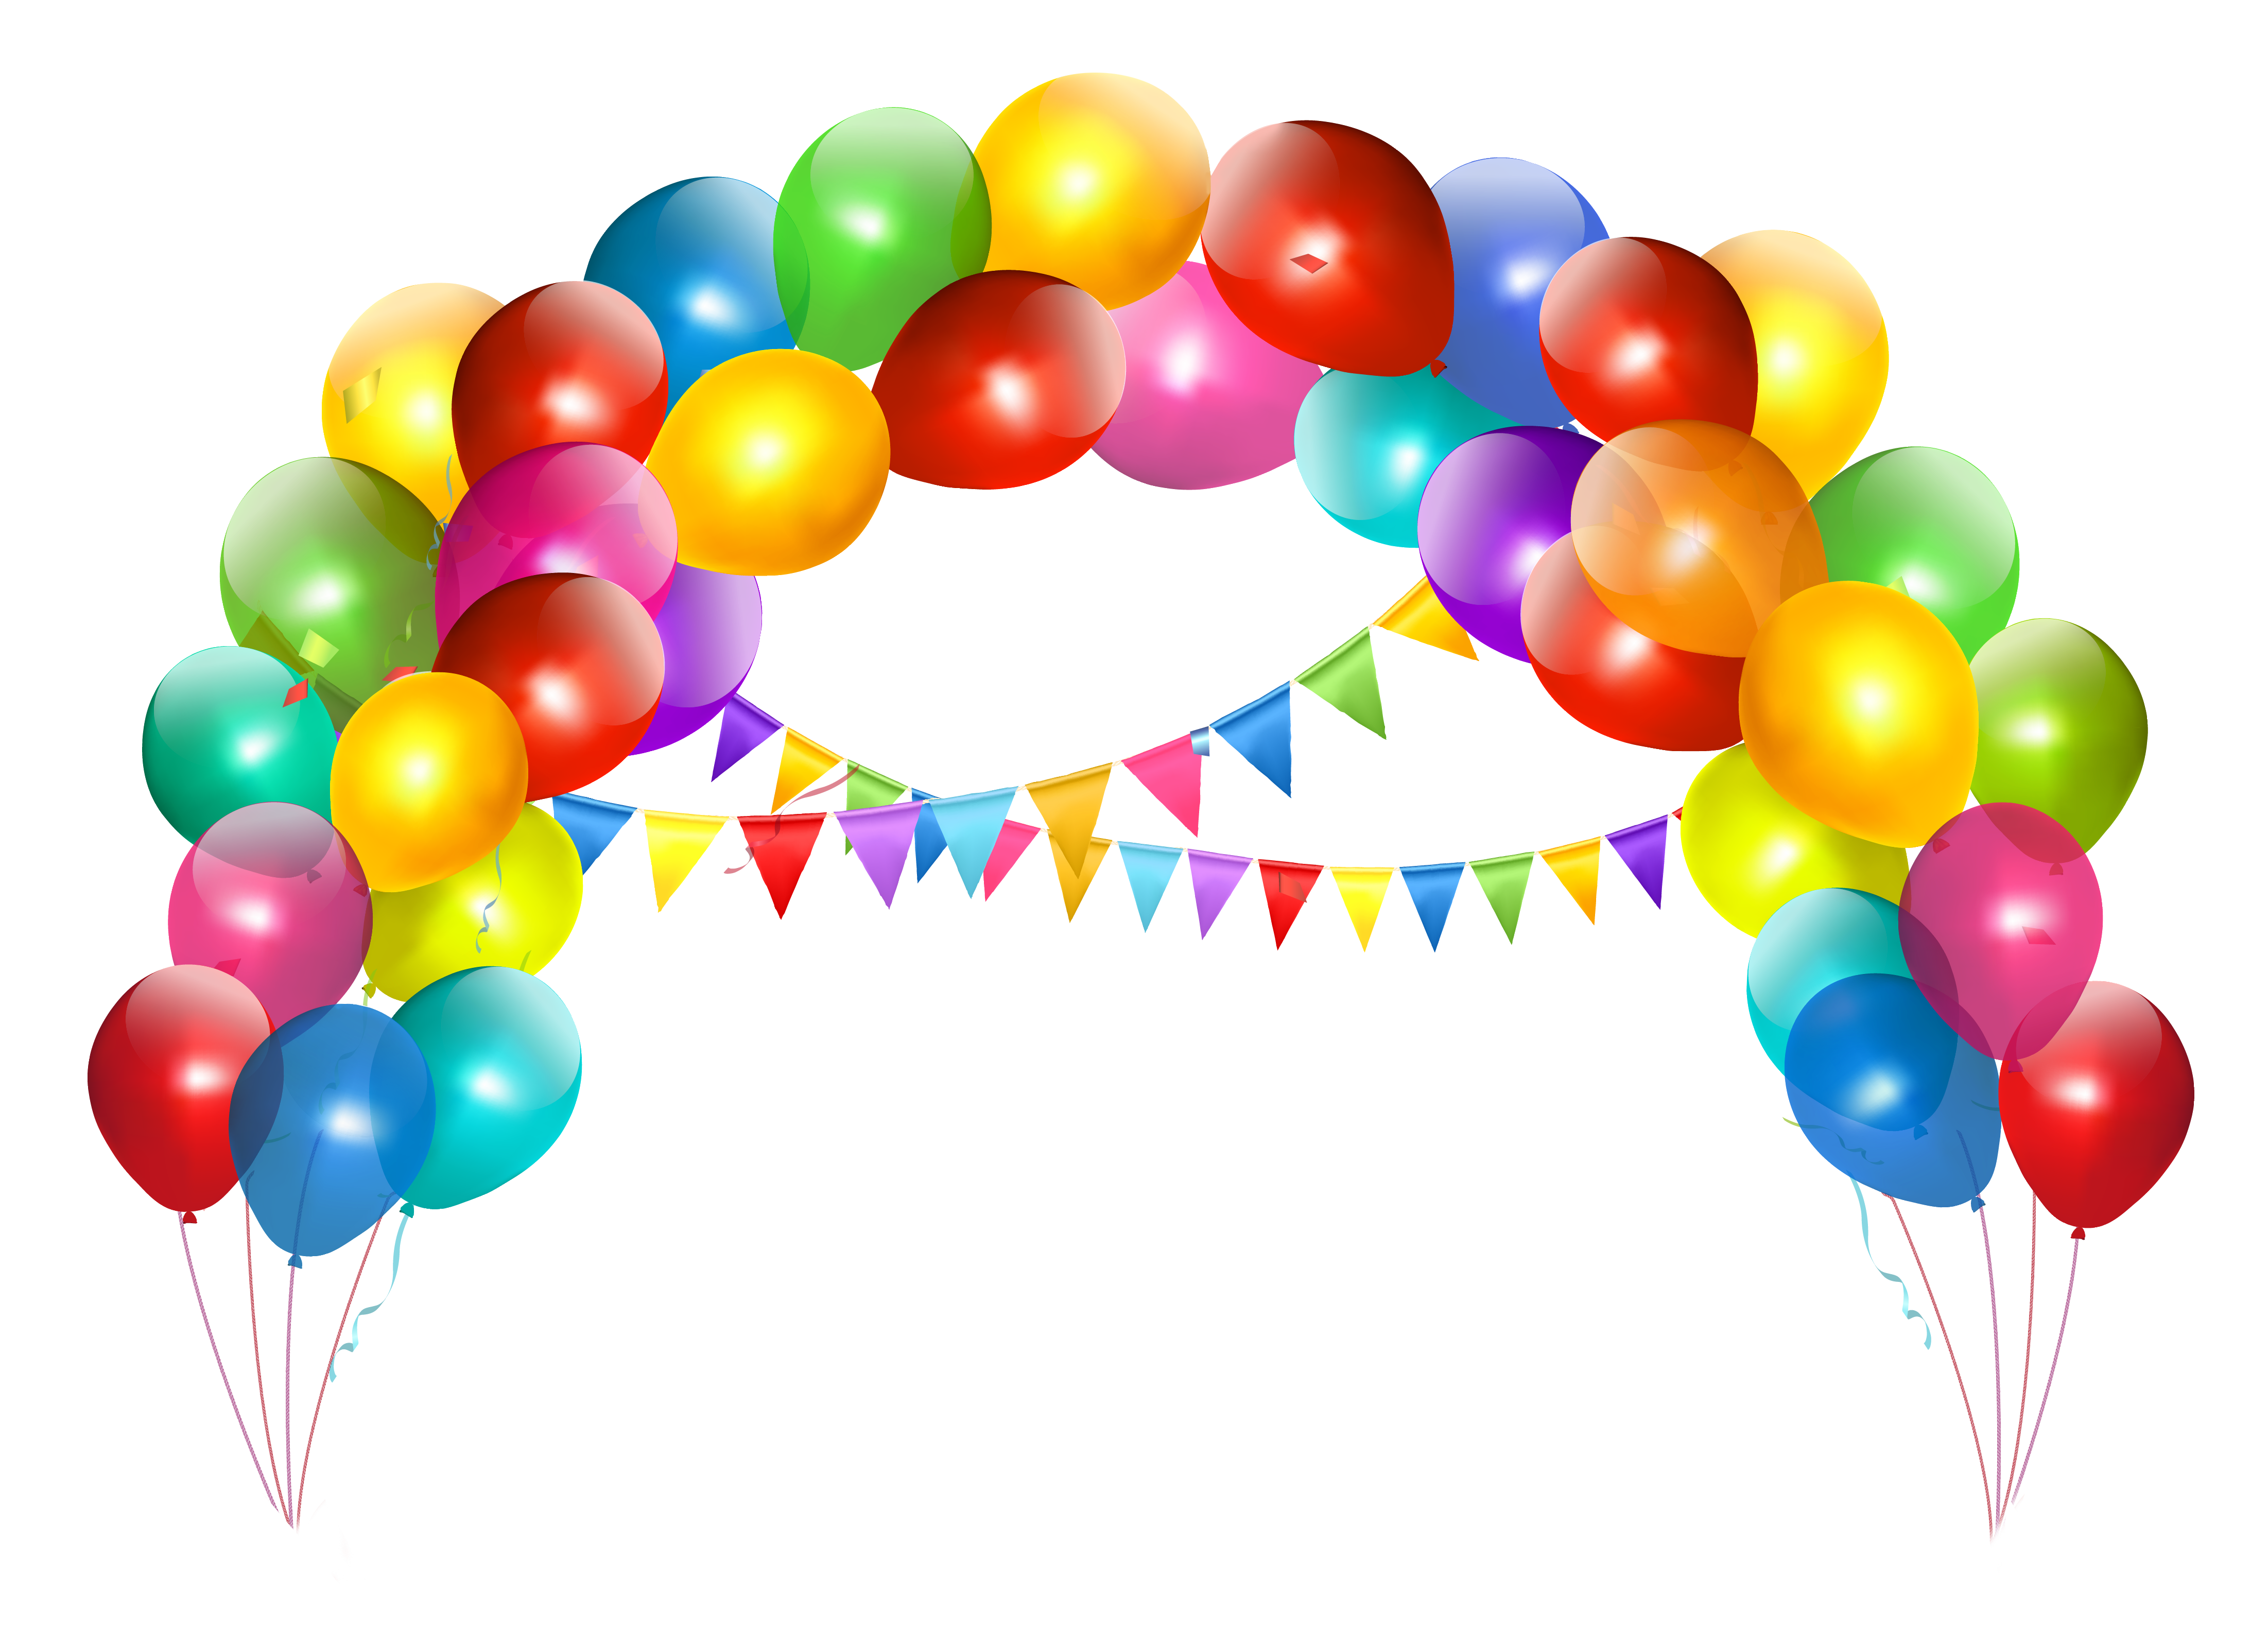 free clipart images balloons - photo #30